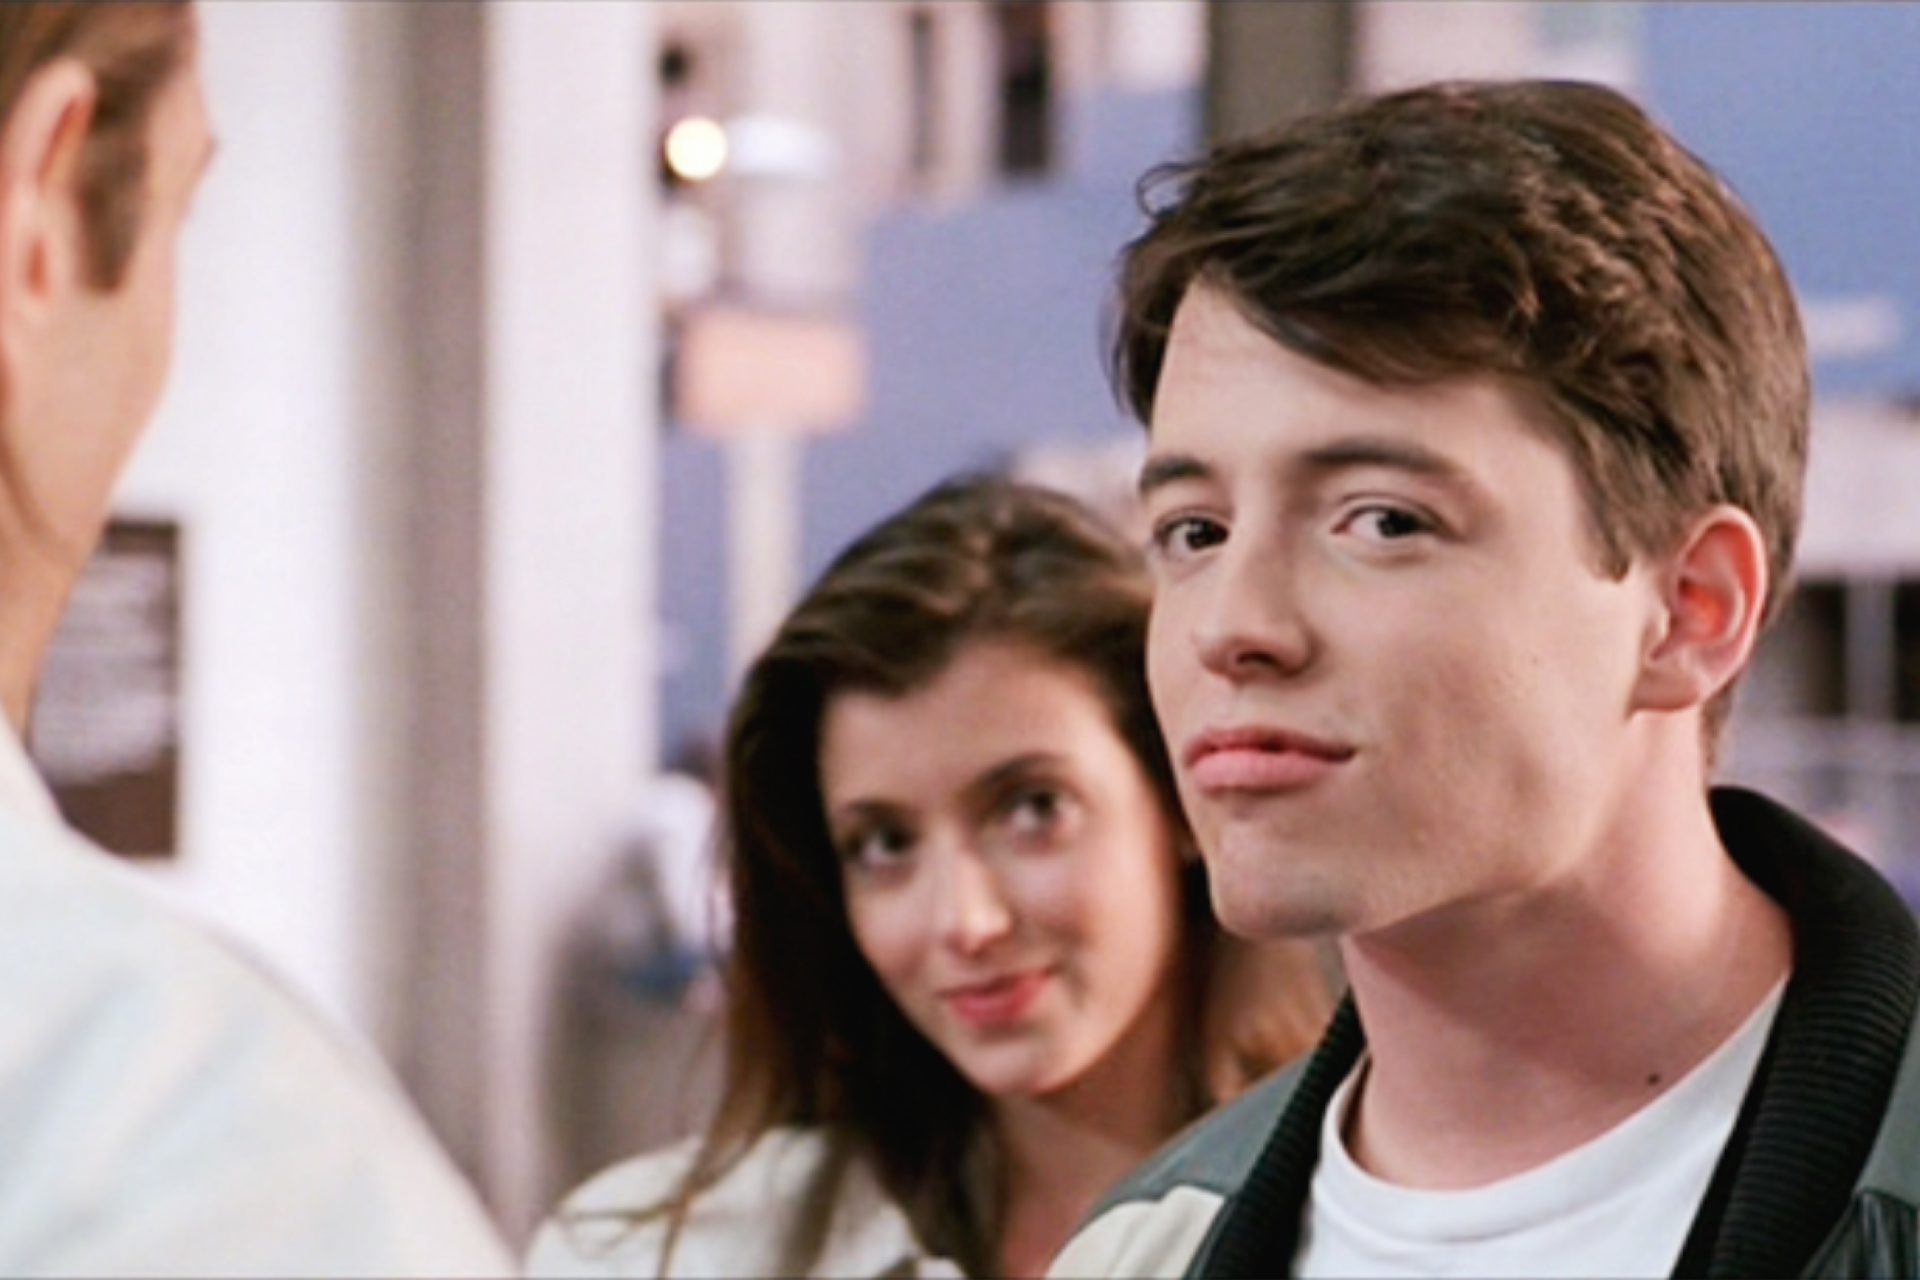 Eternal praise for 'Ferris Bueller's Day Off' and 'The Lion King'